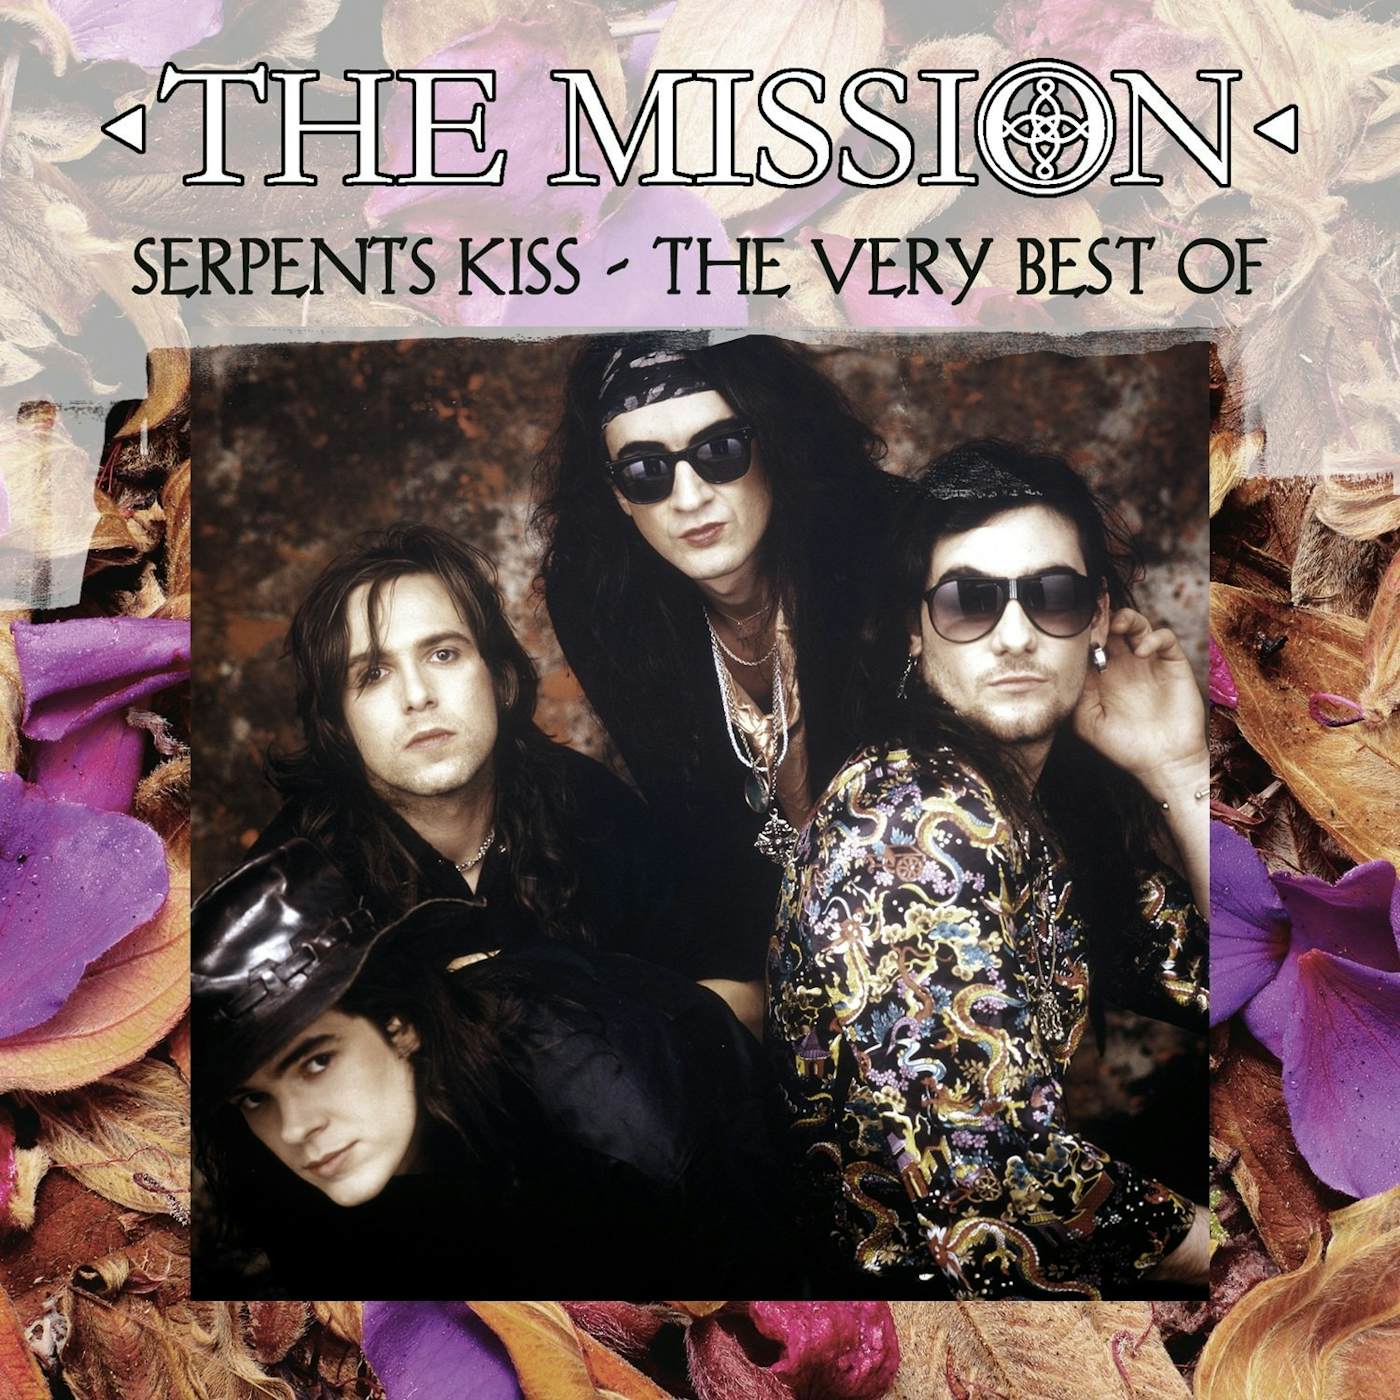 The Mission SERPENTS KISS-THE VERY BEST OF CD